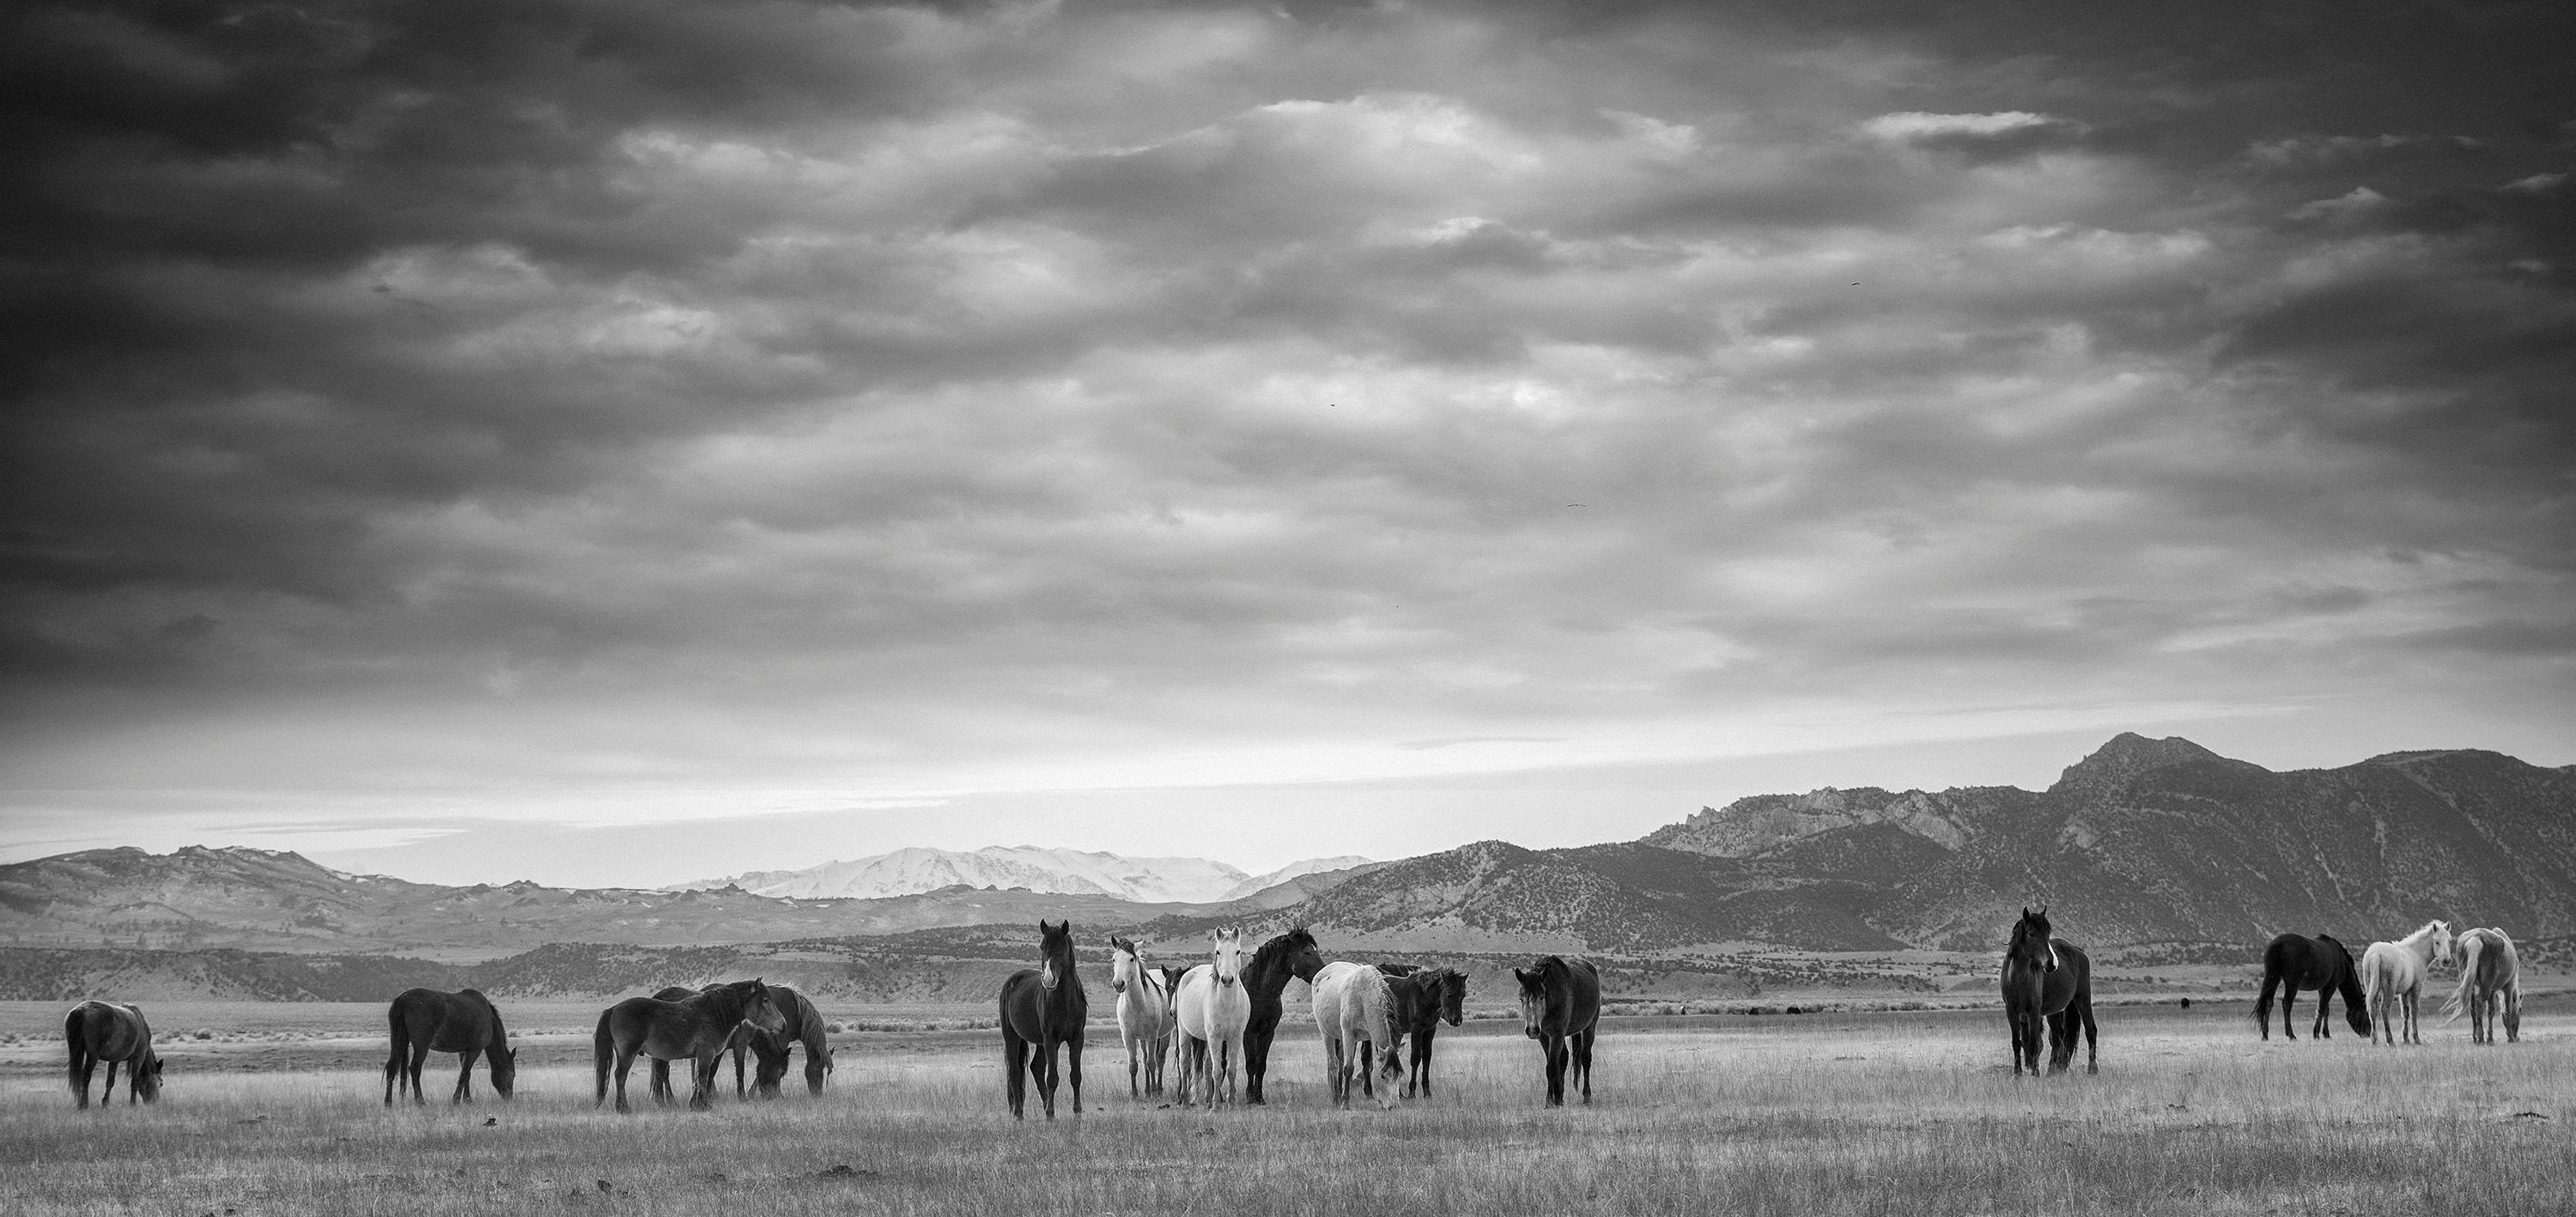 Shane Russeck Landscape Photograph - 1stdibs SPECIAL PRICE : "Gangs All Here" - 40x26 Wild Horse Photography